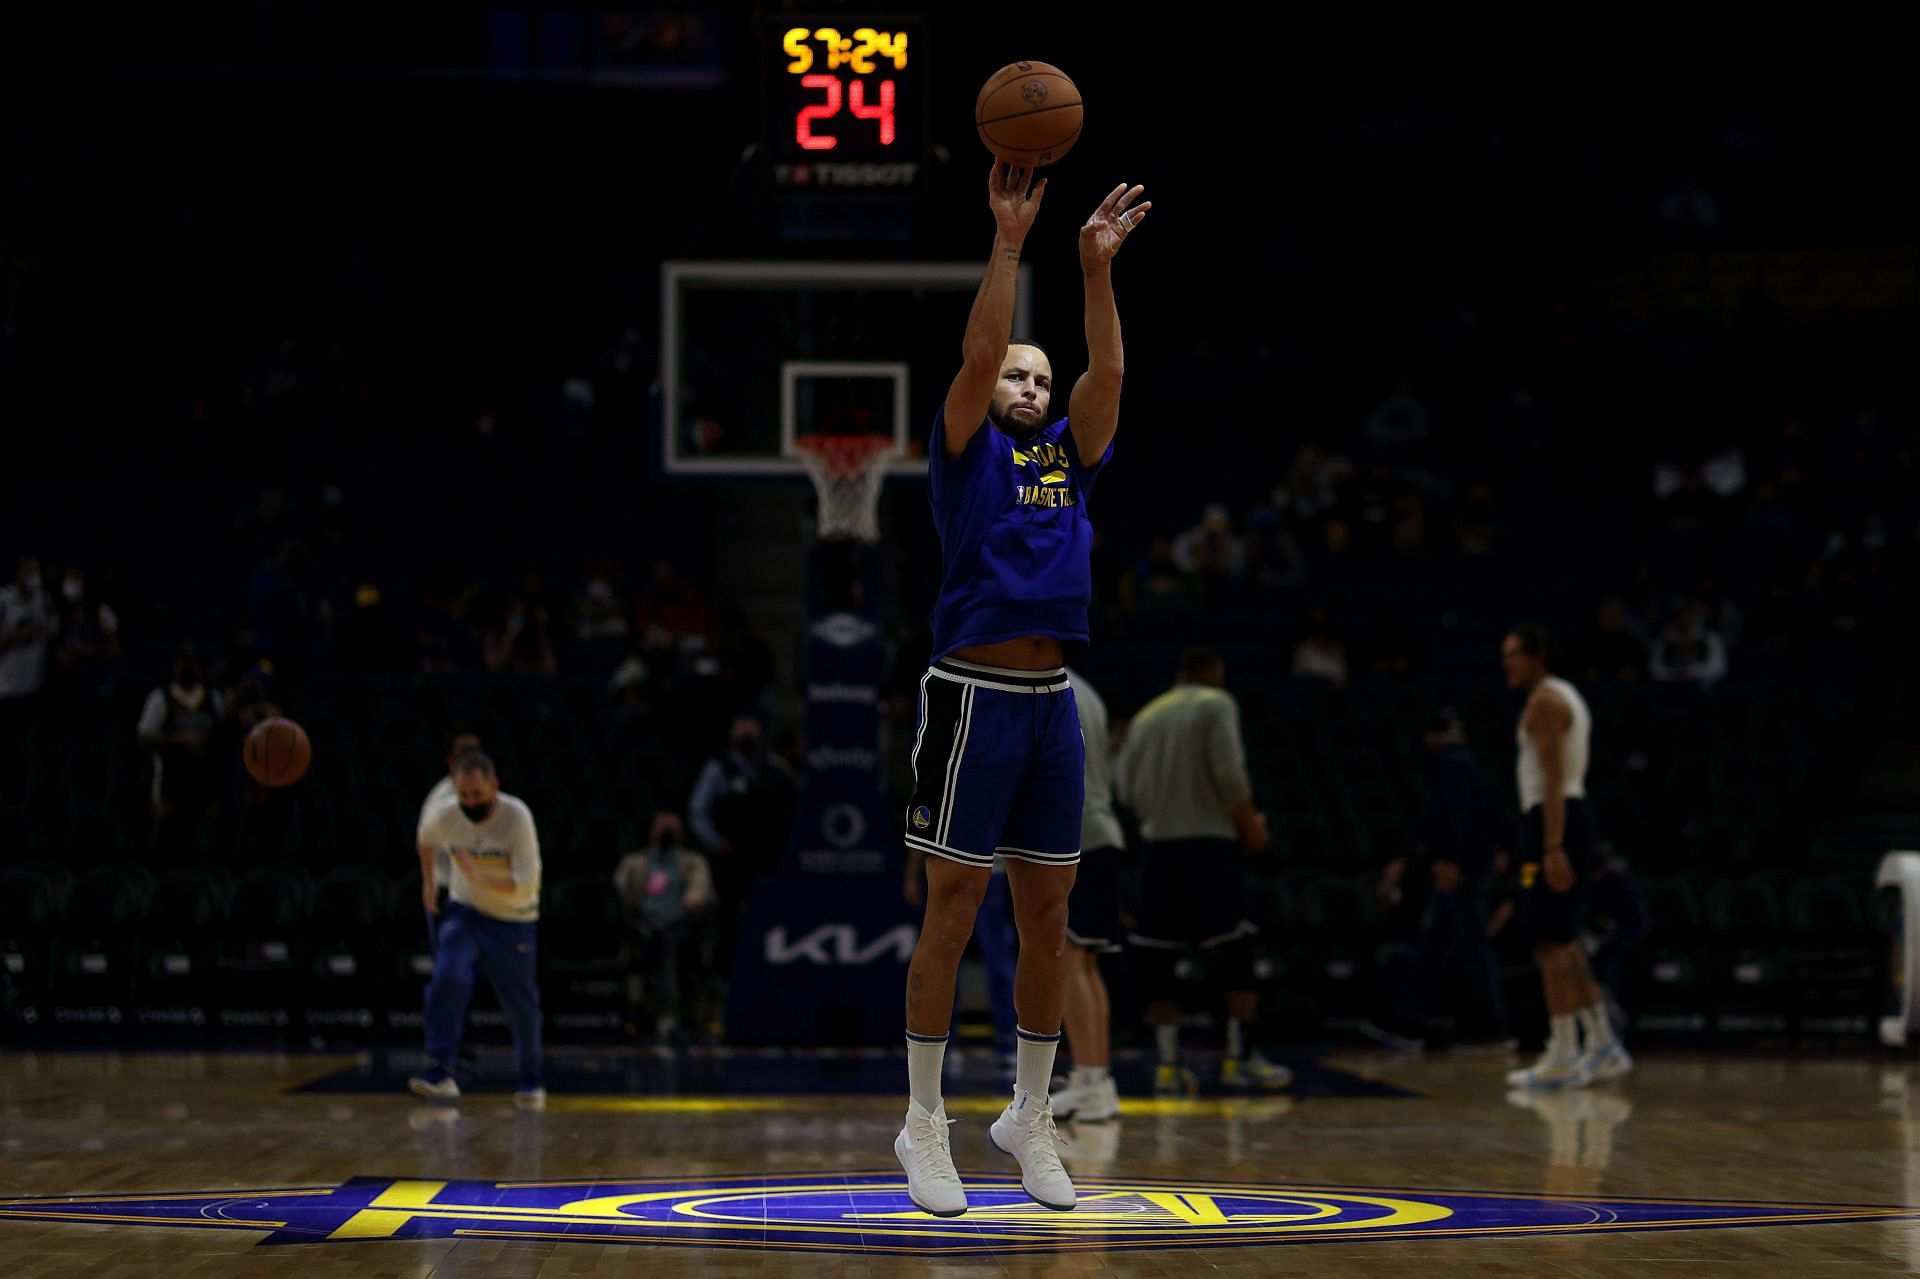 Steph Curry attempts to overcome his shooting slump in recent video